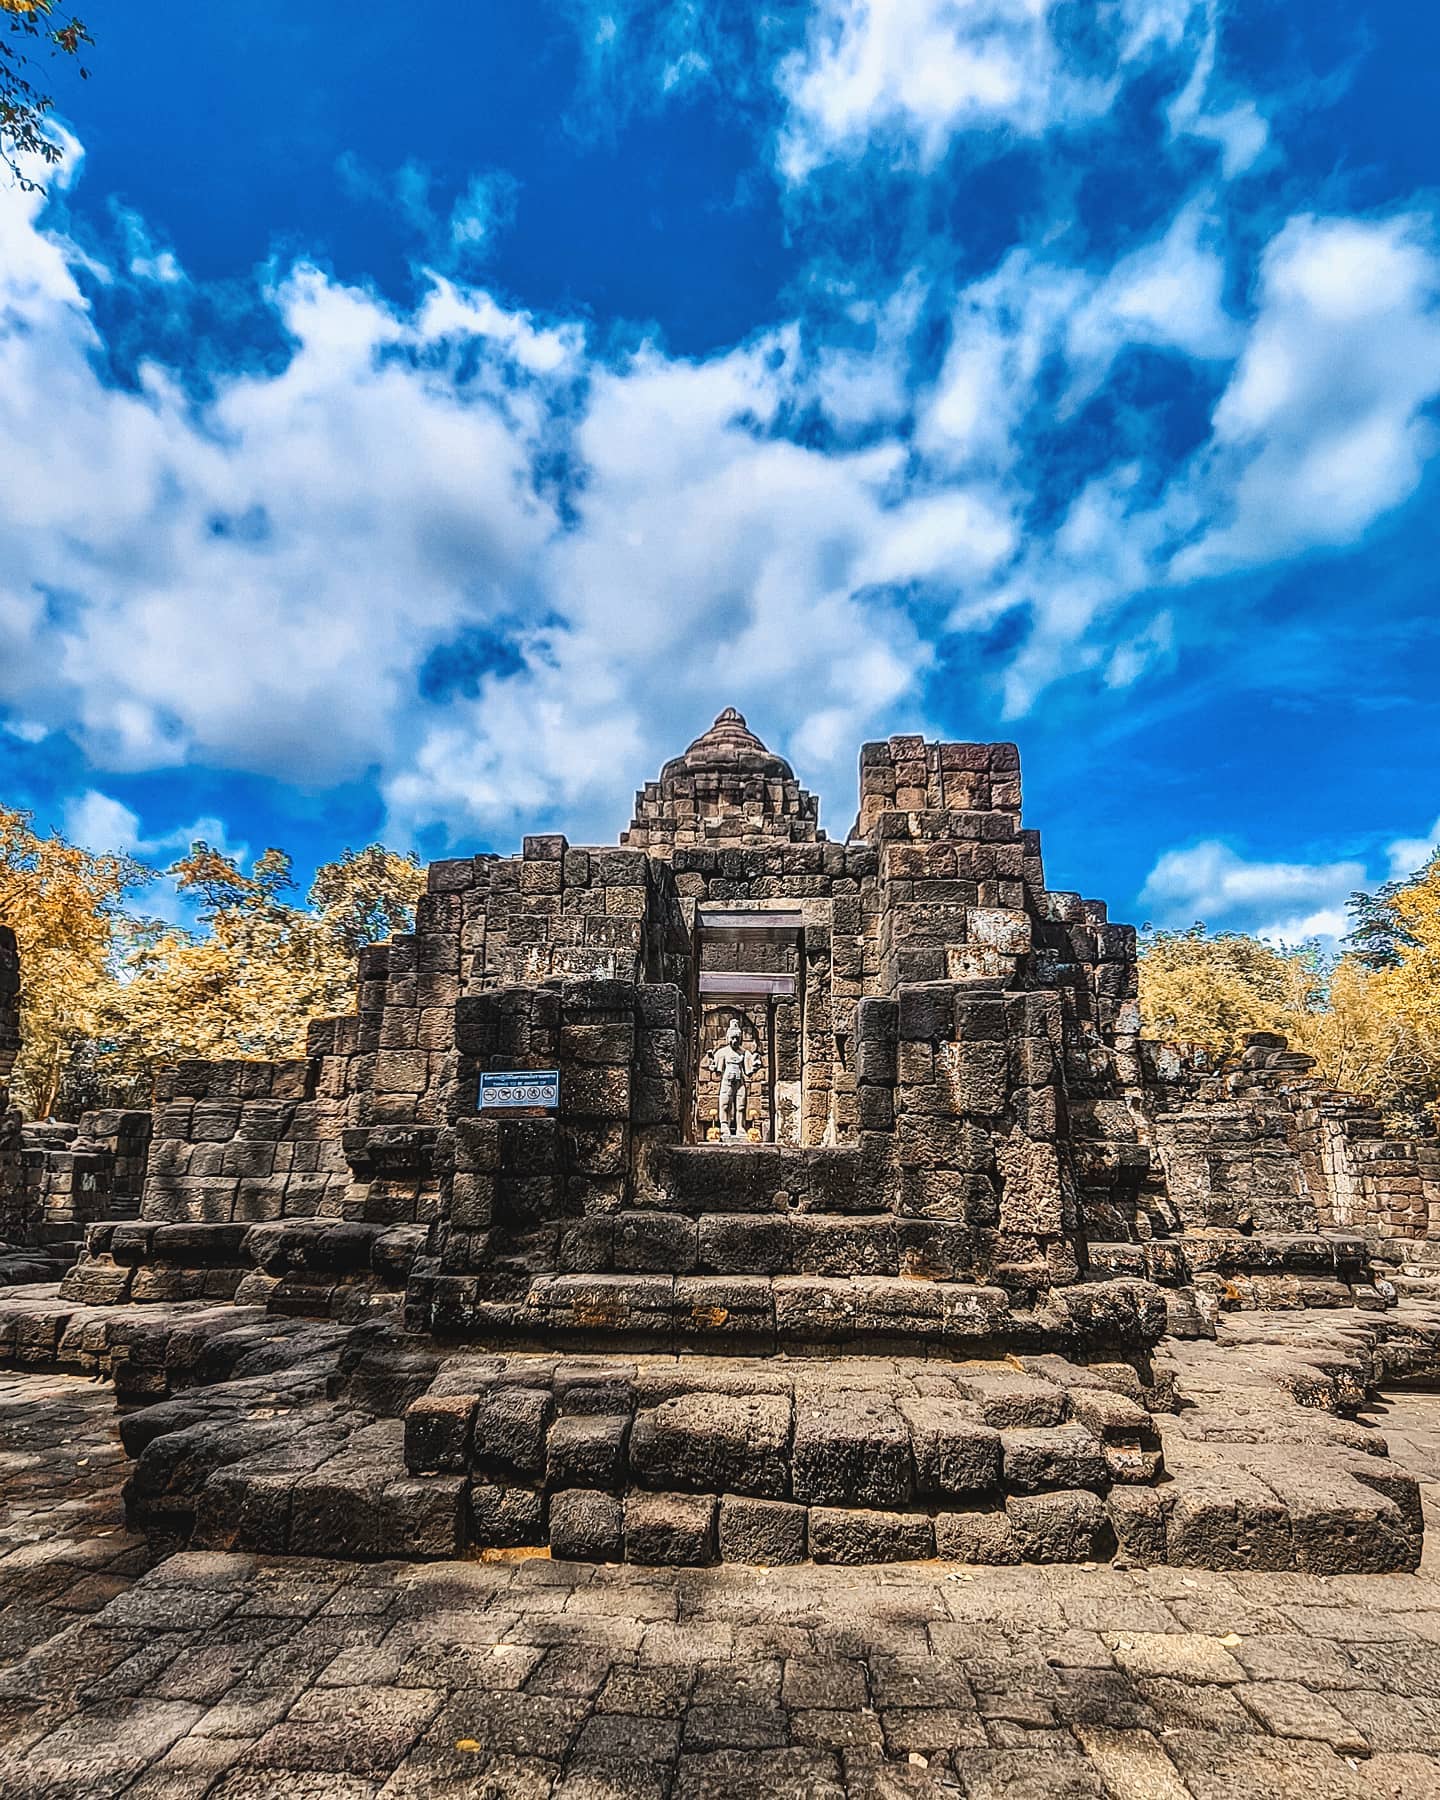 8 historical parks in Thailand - khmer temple